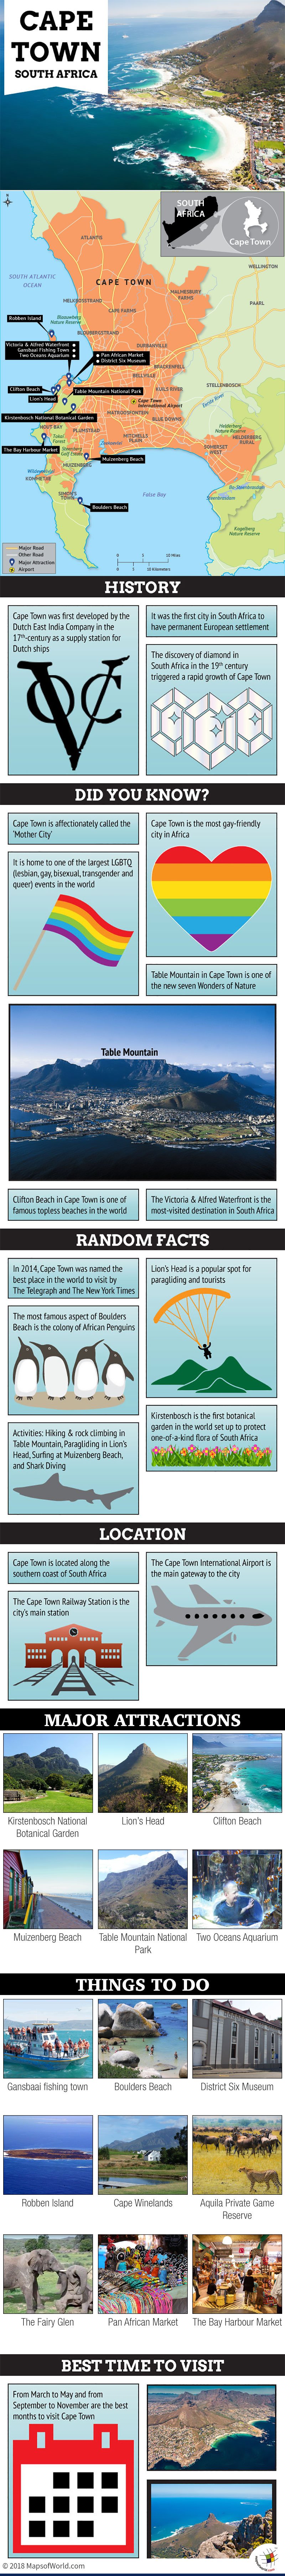 Infographic Depicting Cape Town Tourist Attractions